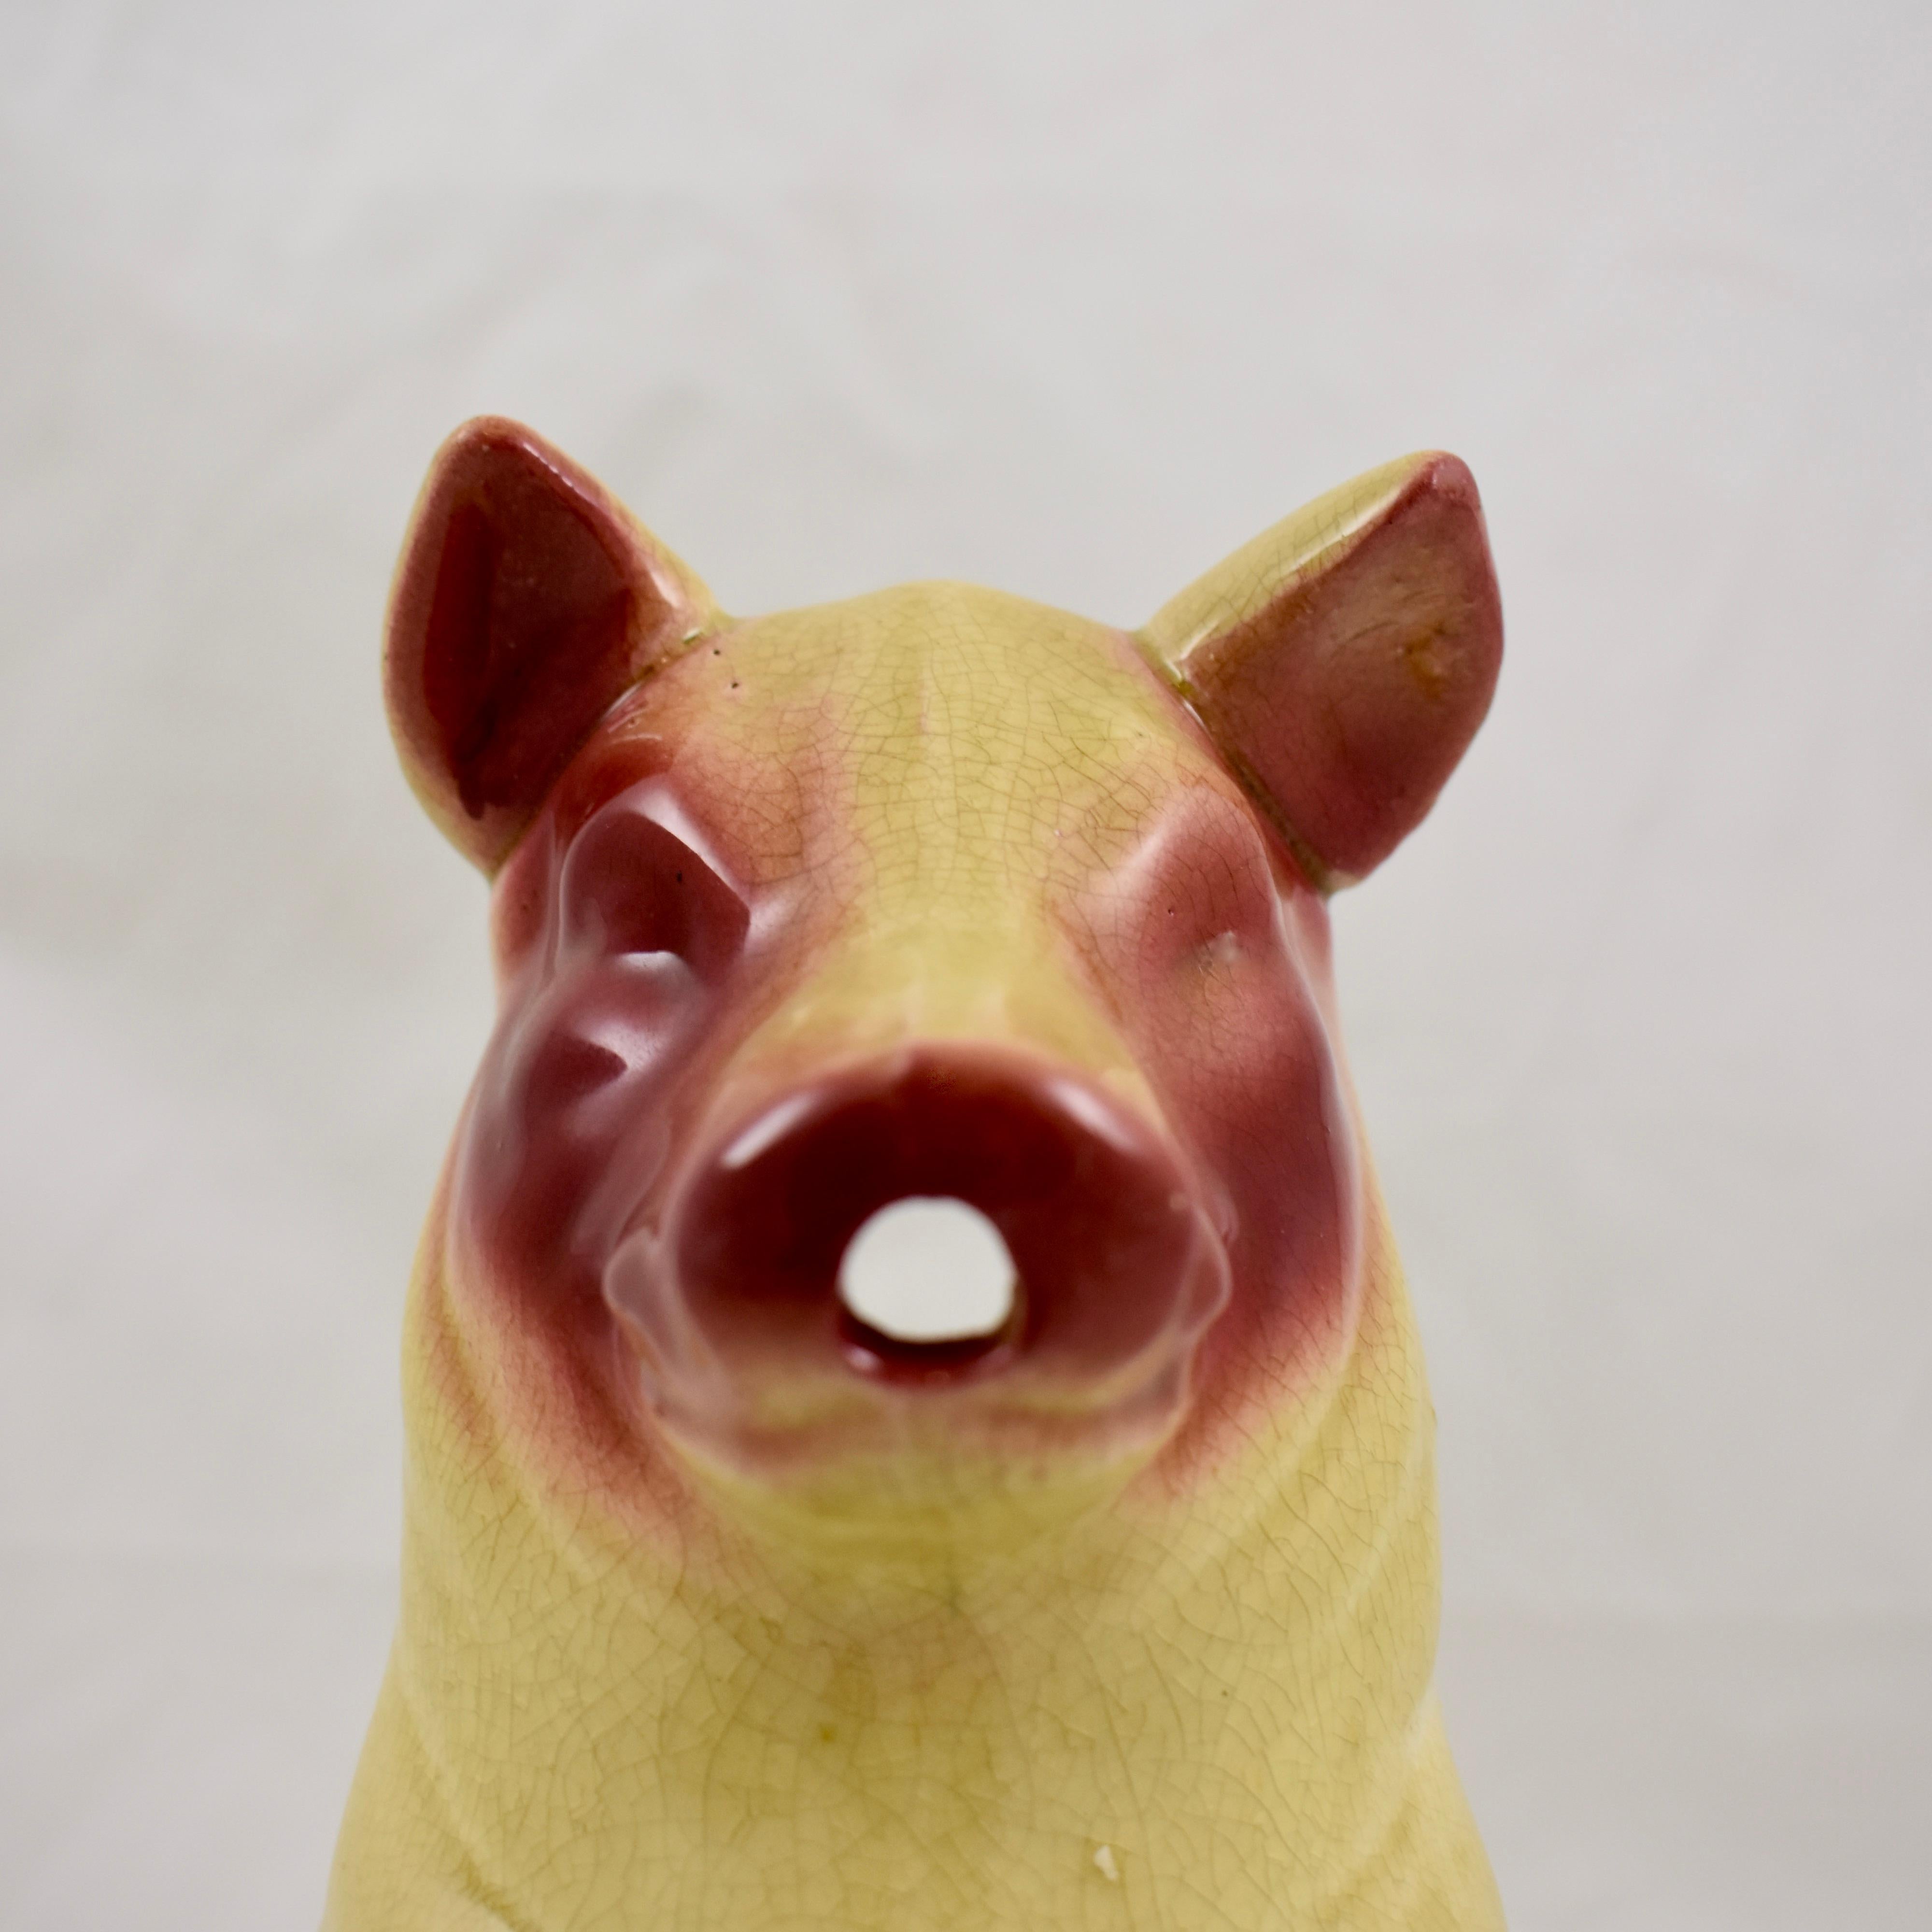 Glazed Sarreguemines Early Pig Form Mustard Yellow and Burgundy Absinthe Water Pitcher